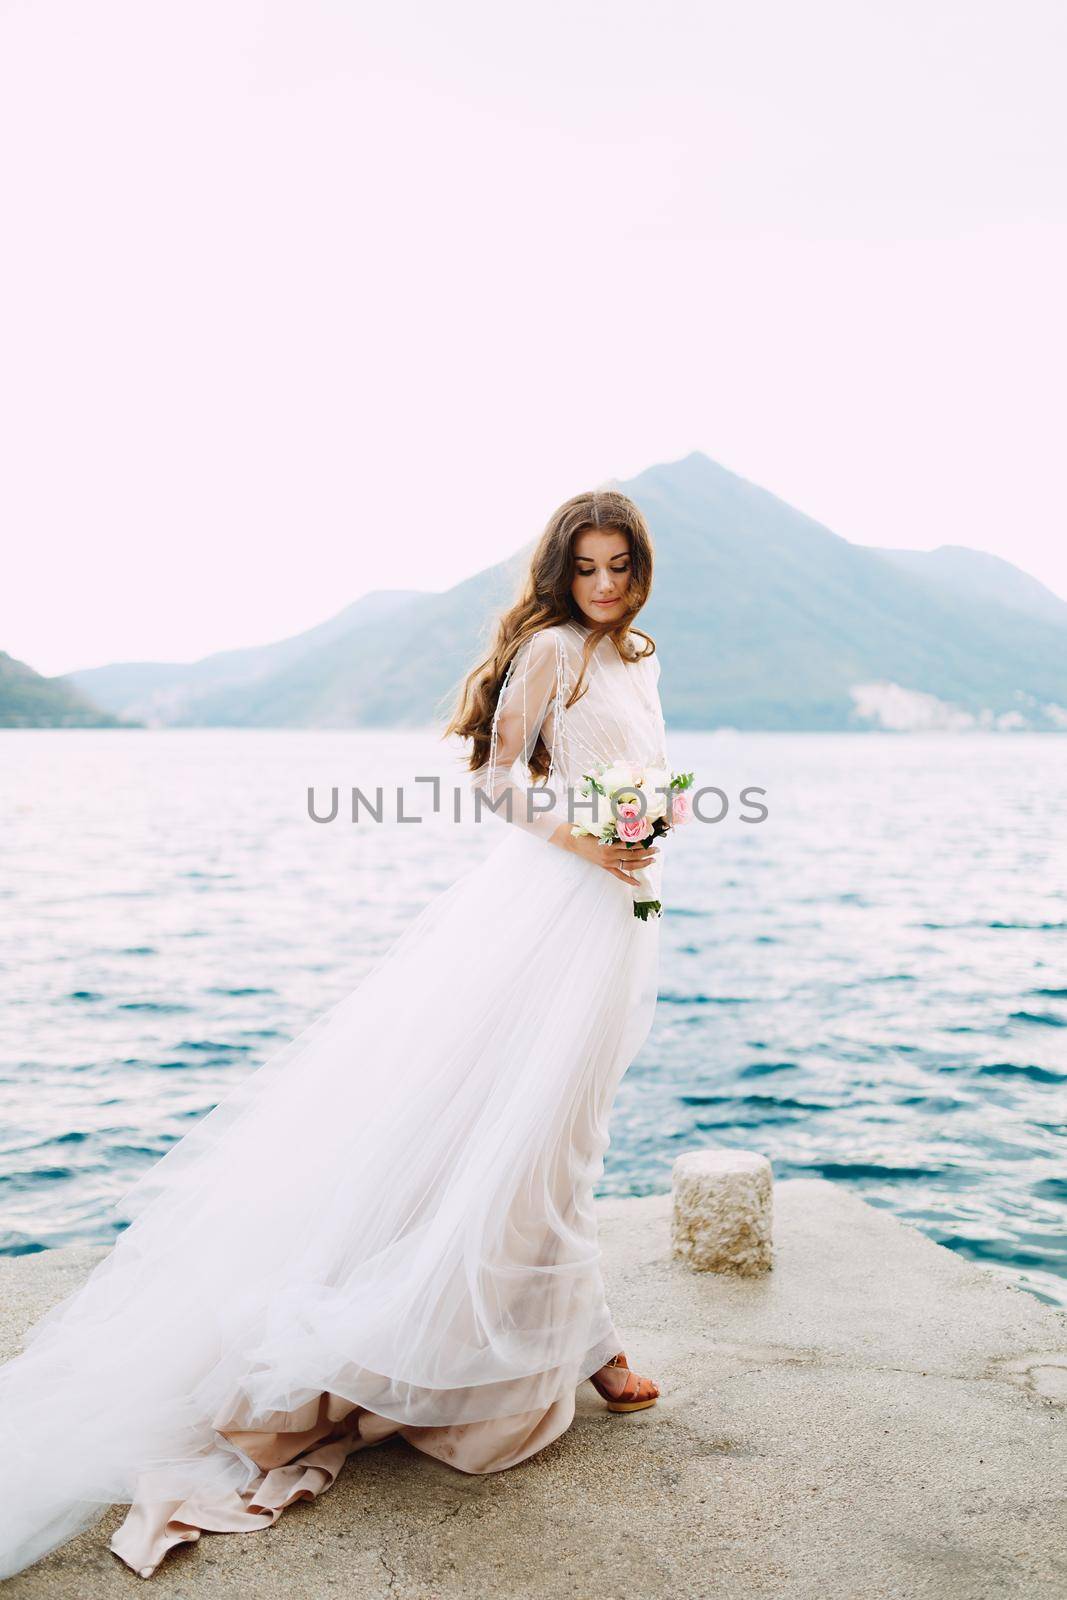 The bride holds a bouquet of roses in her hands and stands on the pier in the Bay of Kotor by Nadtochiy